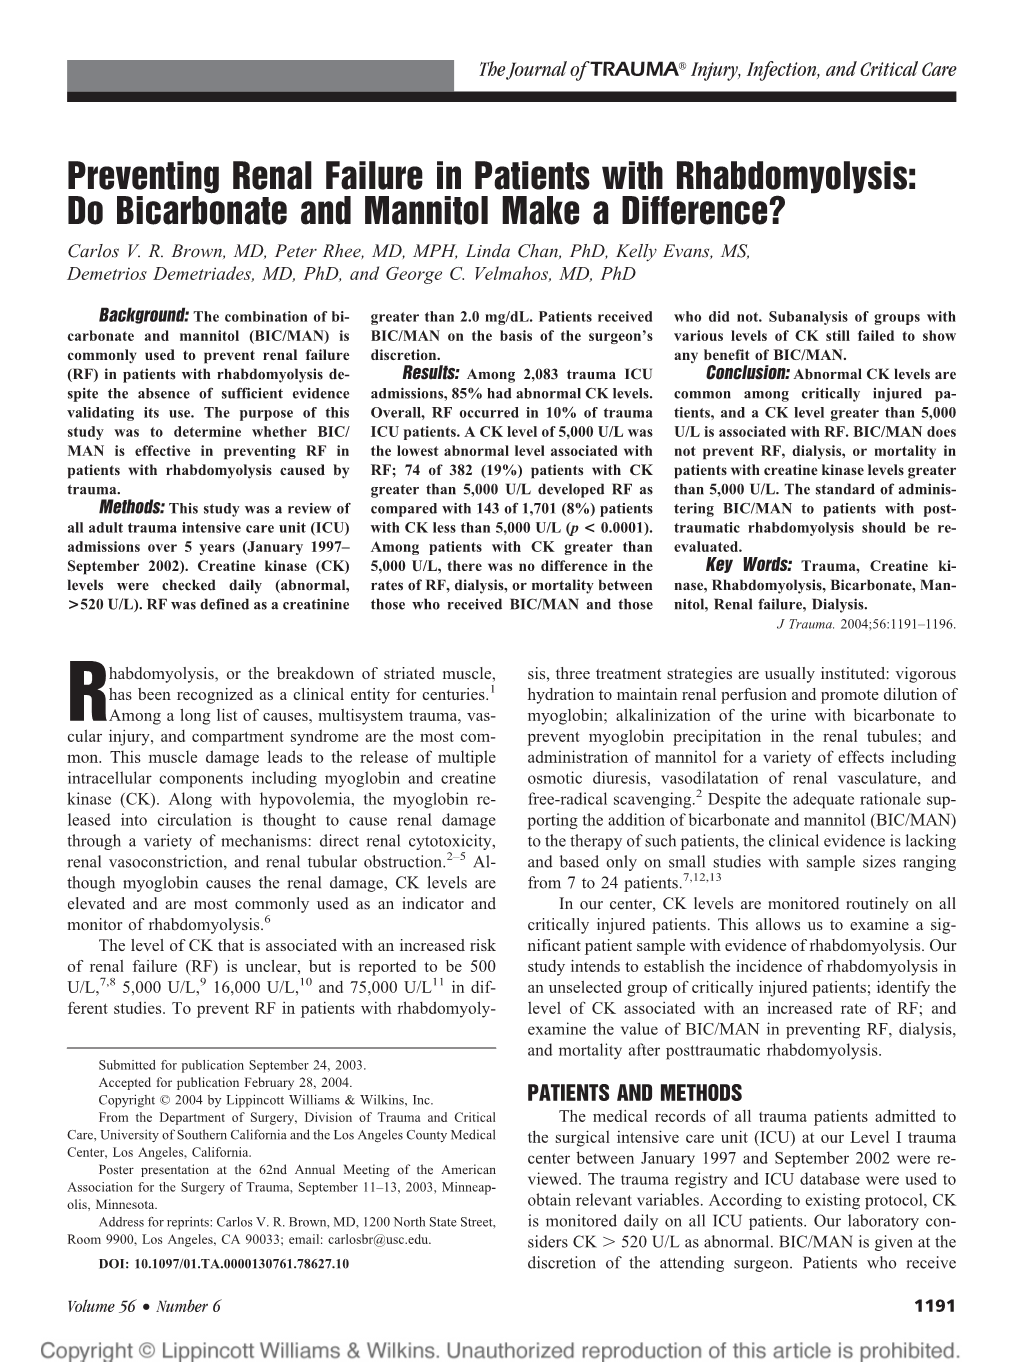 Preventing Renal Failure in Patients with Rhabdomyolysis: Do Bicarbonate and Mannitol Make a Difference? Carlos V